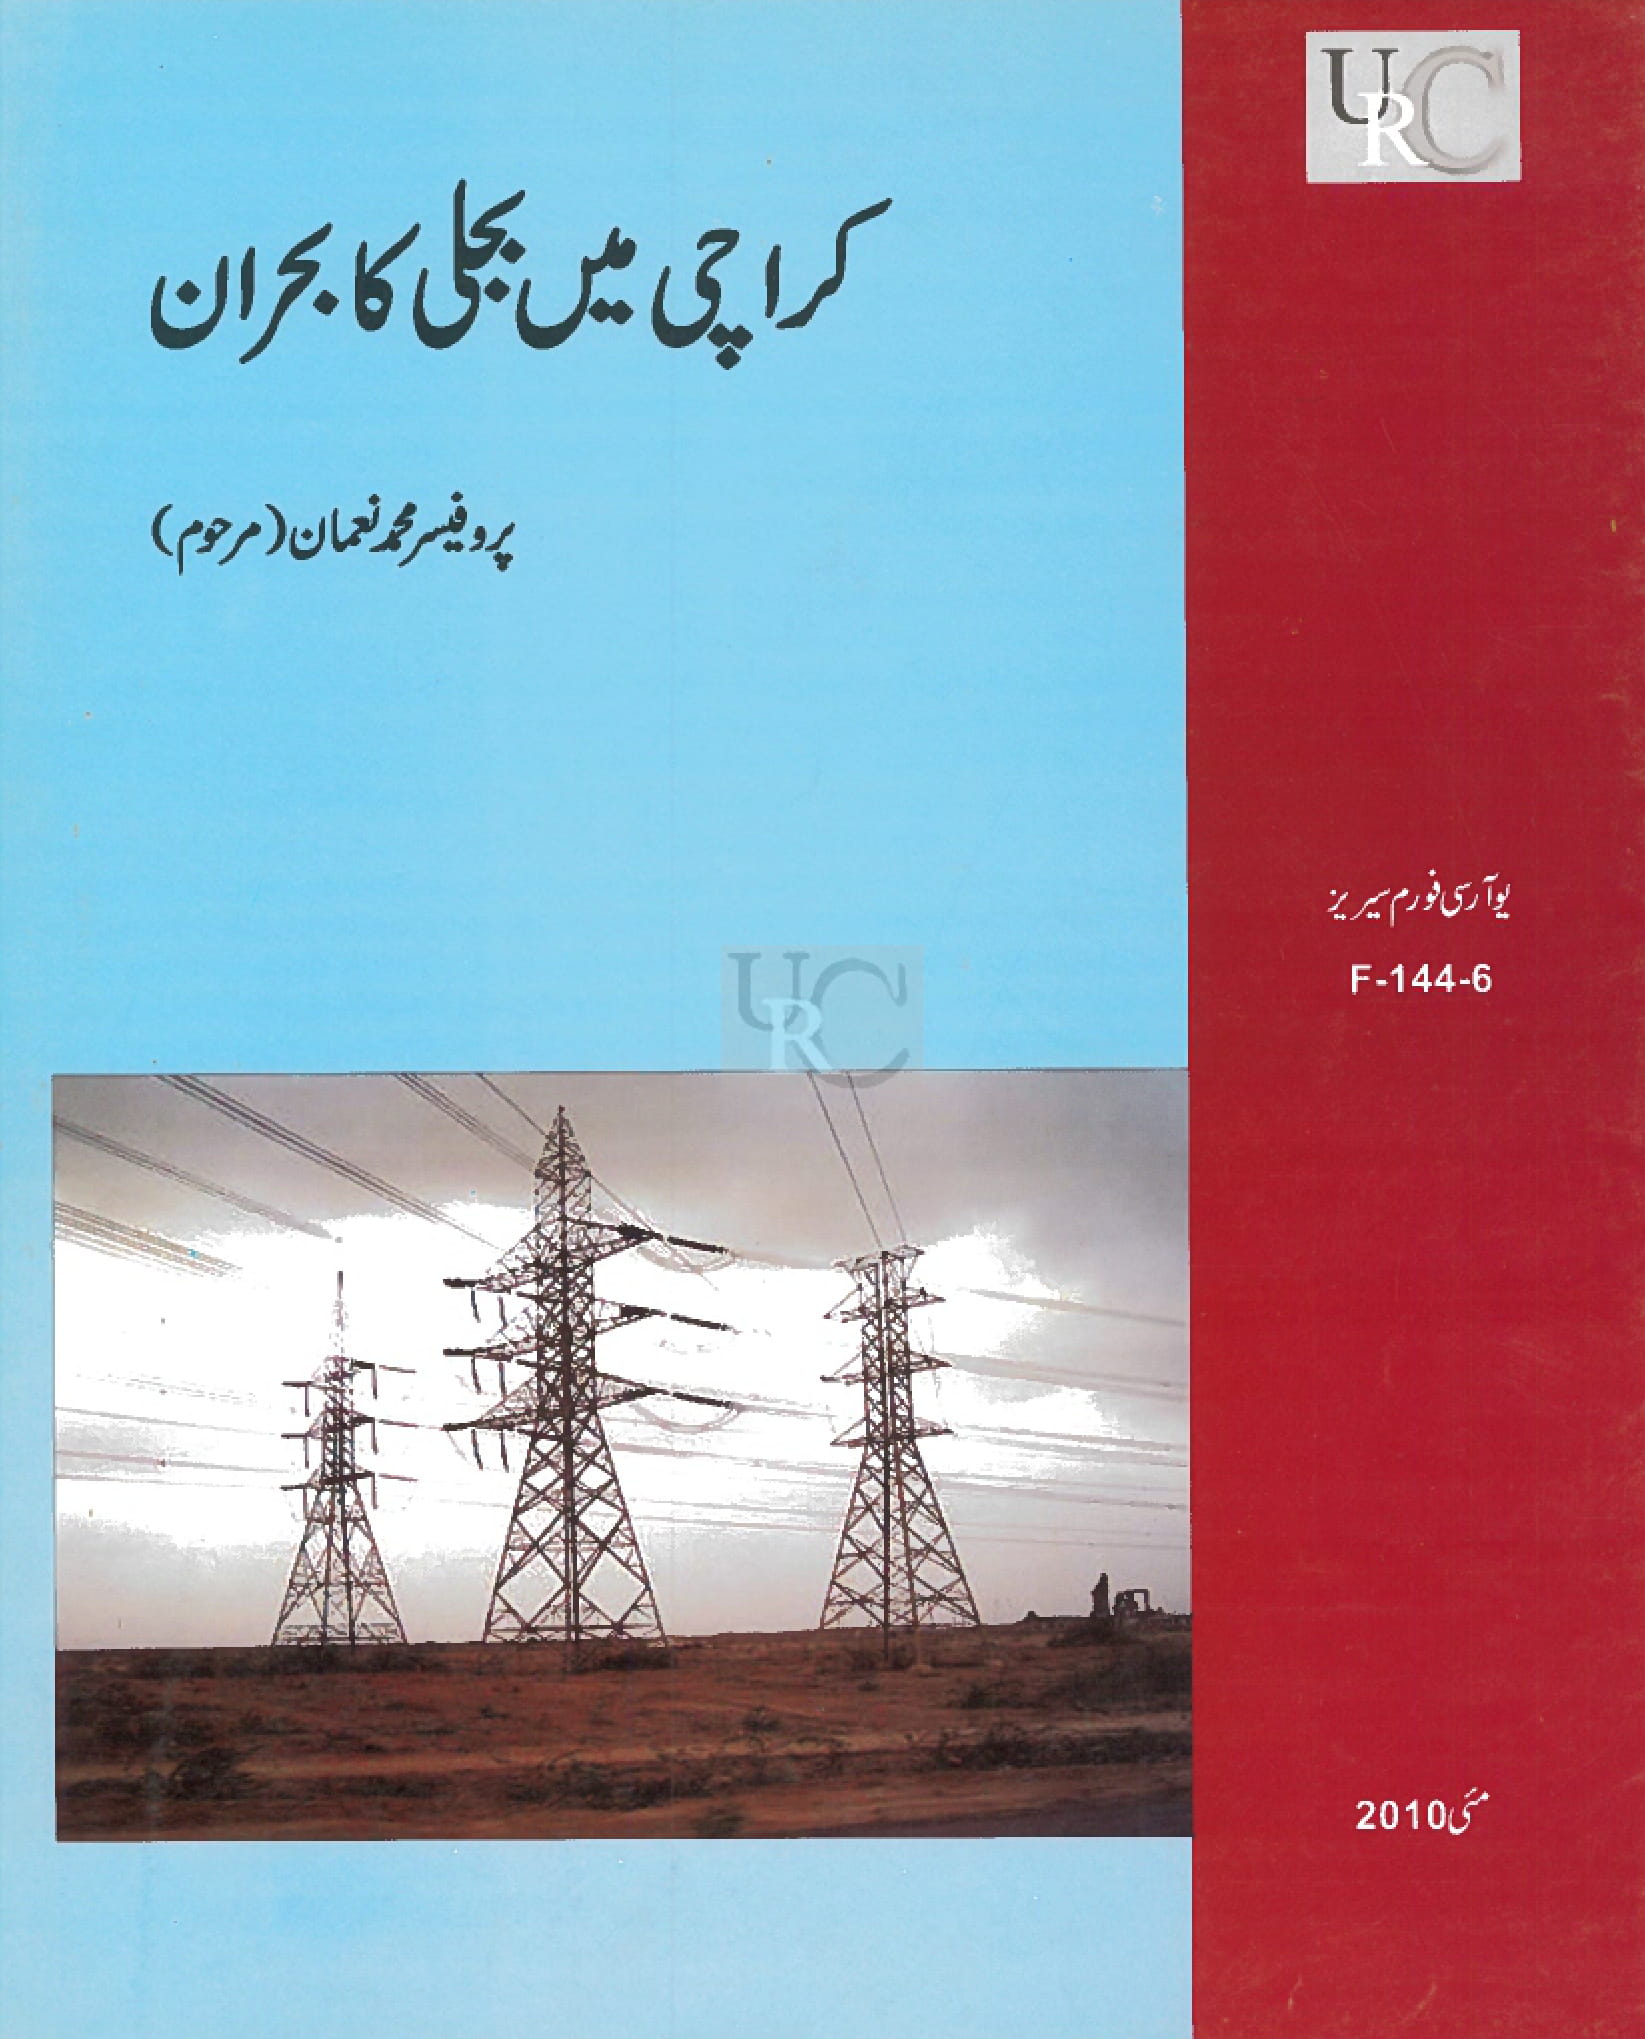 Electricity Problems in Karachi, Forum by Prof Muhammad Noman 30th July 2008